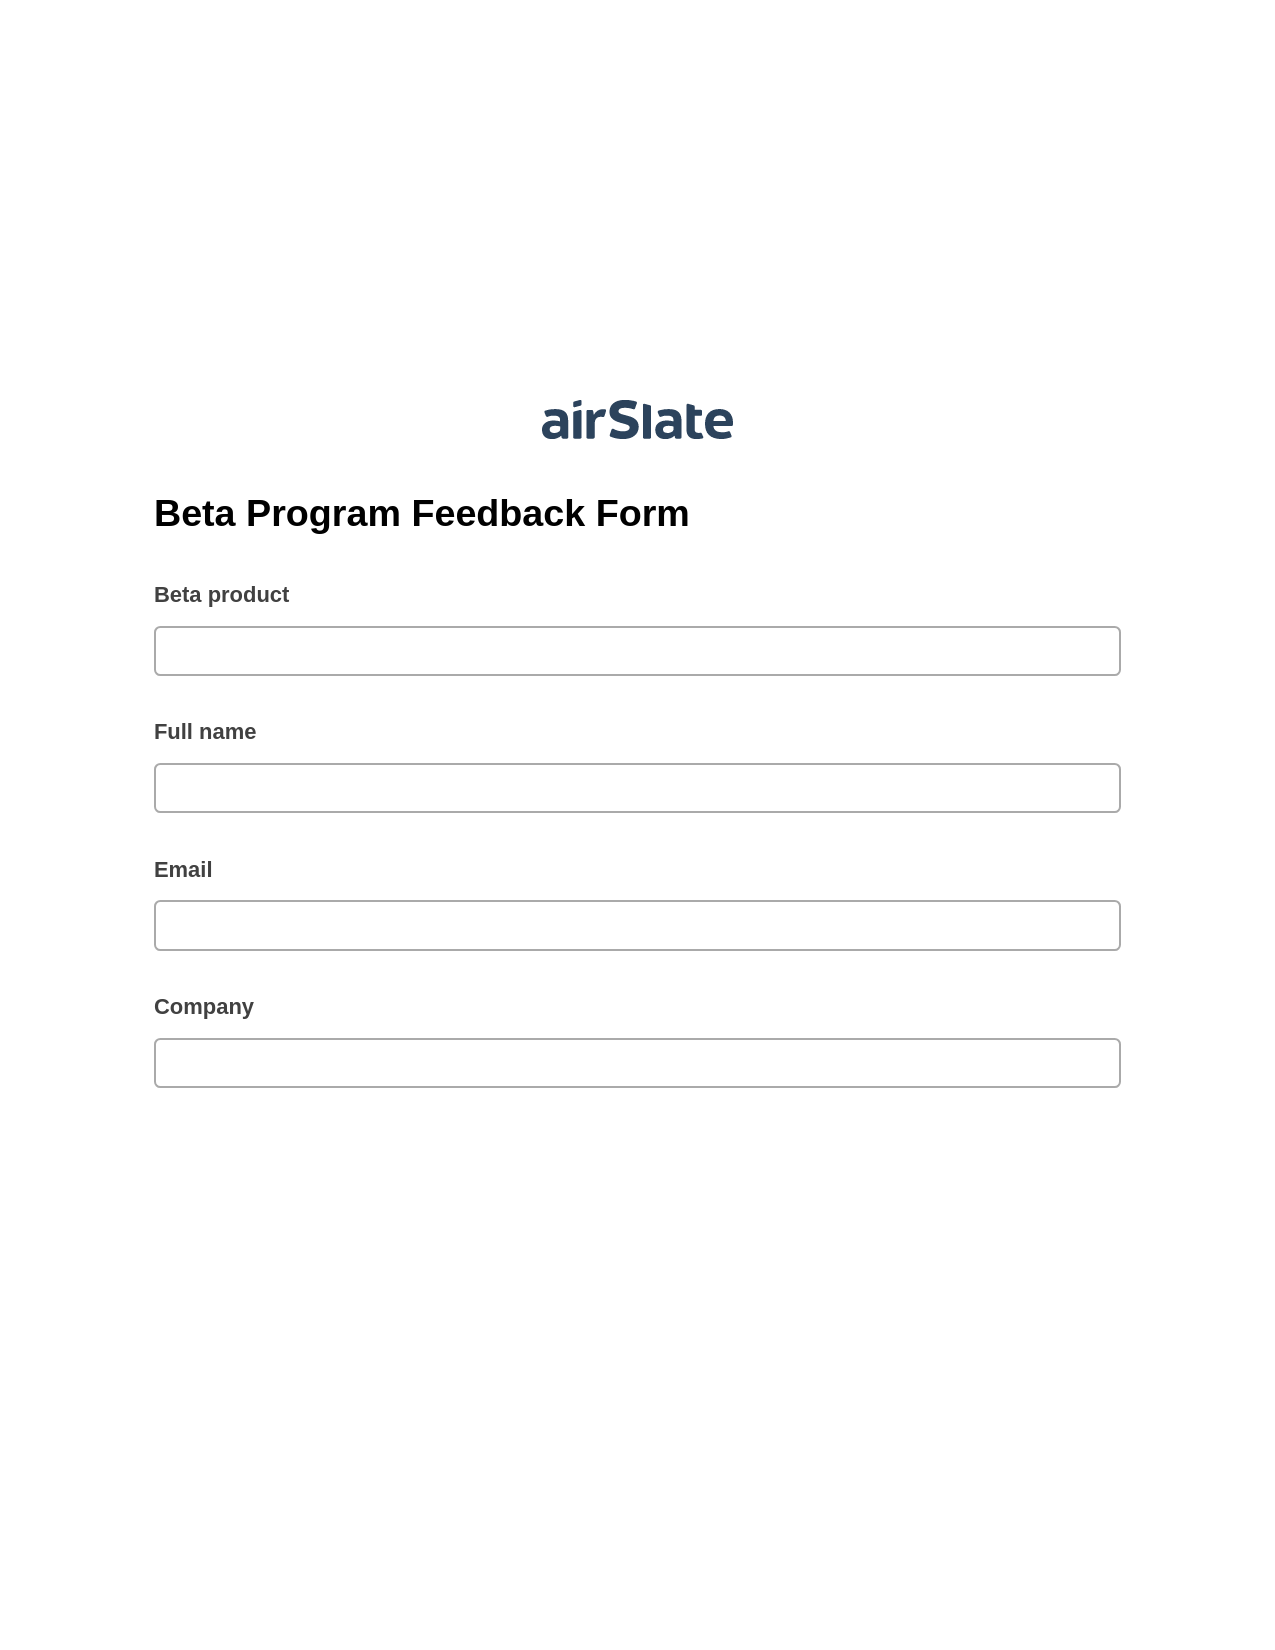 Beta Program Feedback Form Pre-fill Dropdowns from MySQL Bot, Send Mailchimp Campaign Bot, Export to Excel 365 Bot